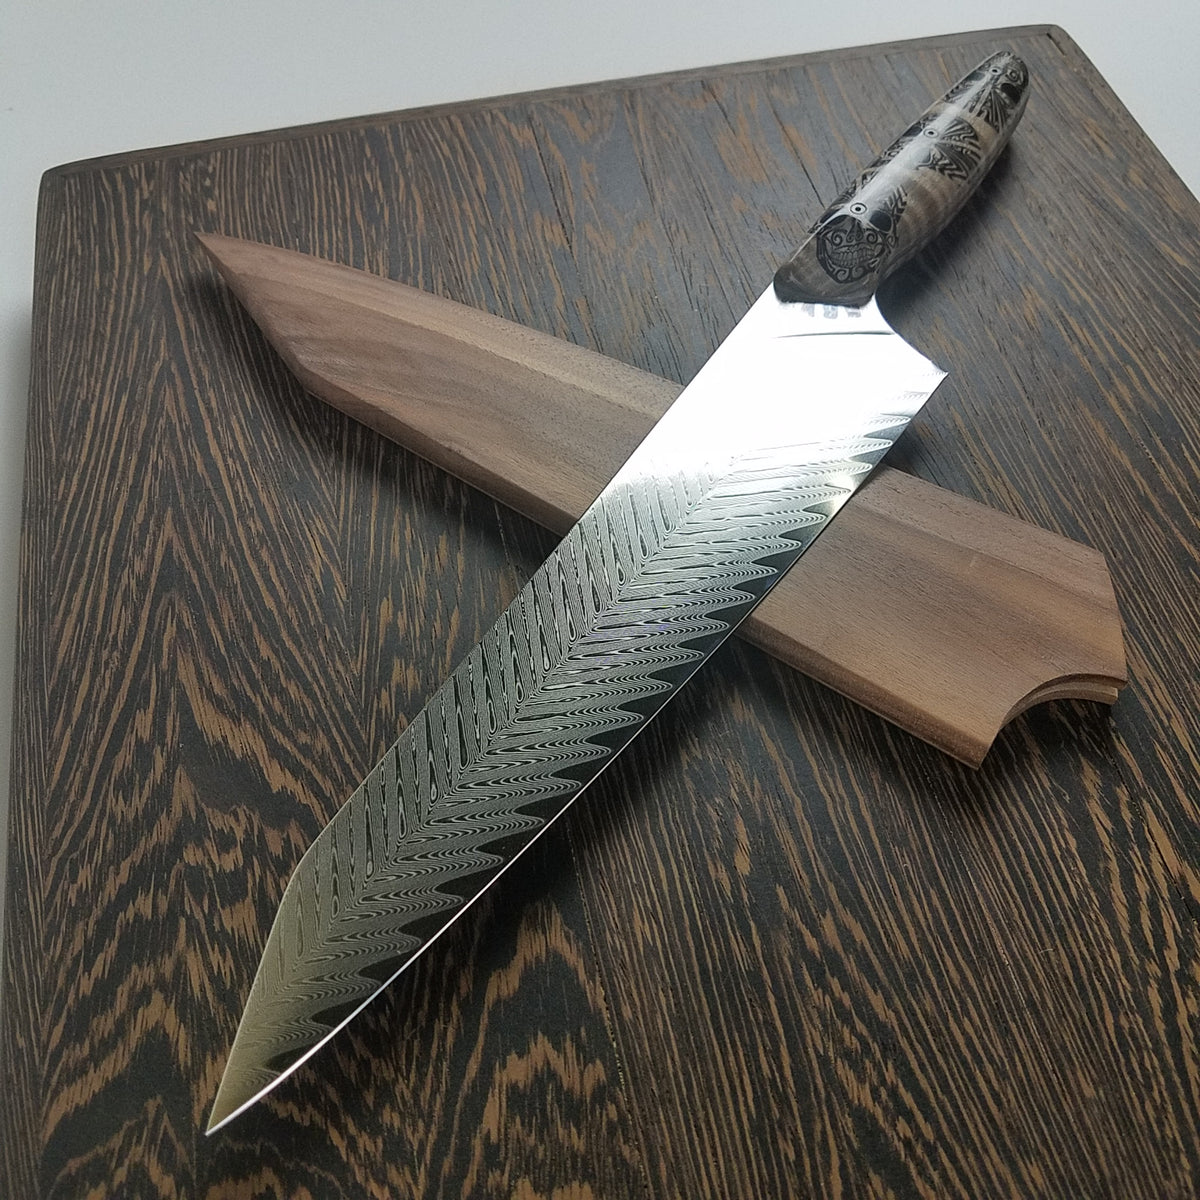 Dr. Dr. Dr. - 10in (254mm) Damascus Gyuto - Sawtooth - Smooth Handle